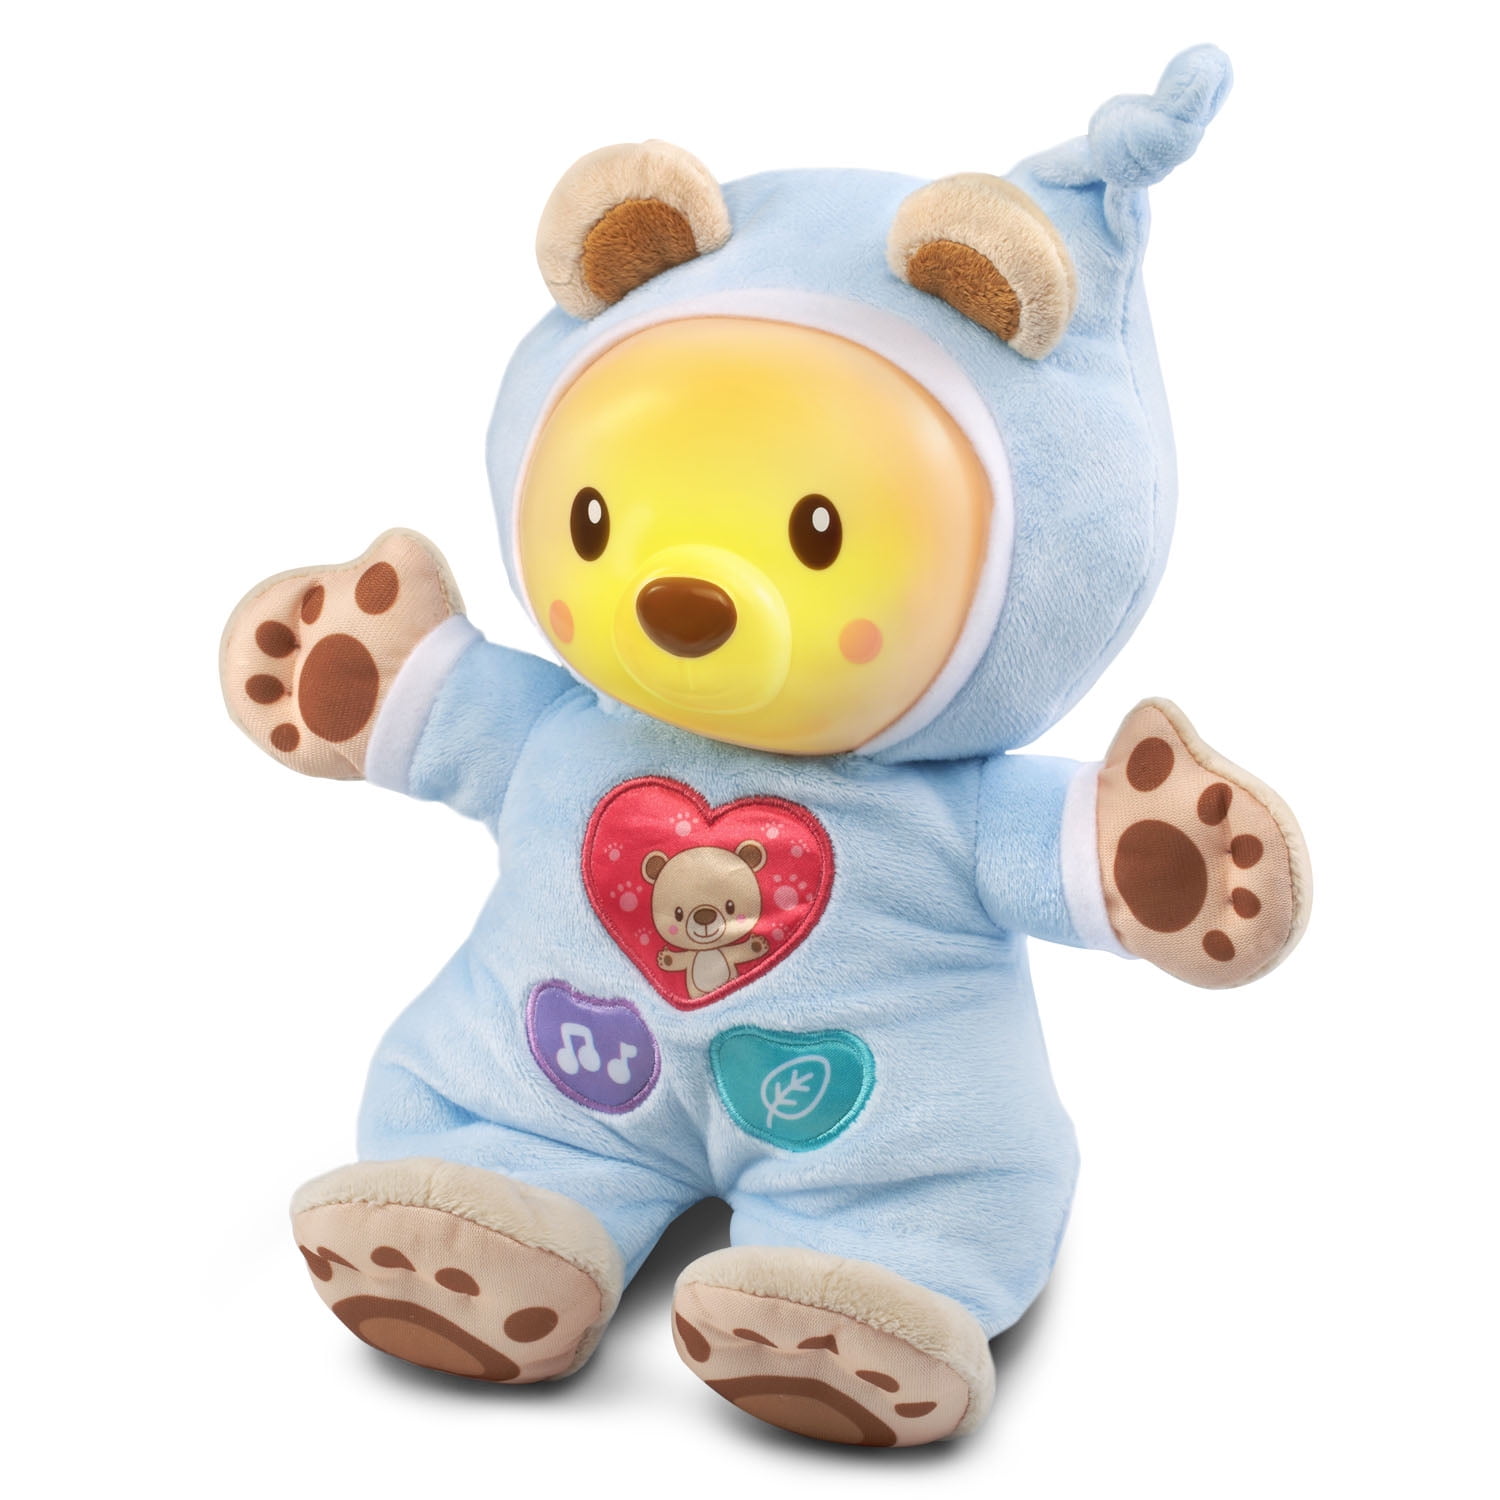 Teddy Bear Toy Doll Bedtime Blue VTech Baby Soothing Song Music Slumbers New 